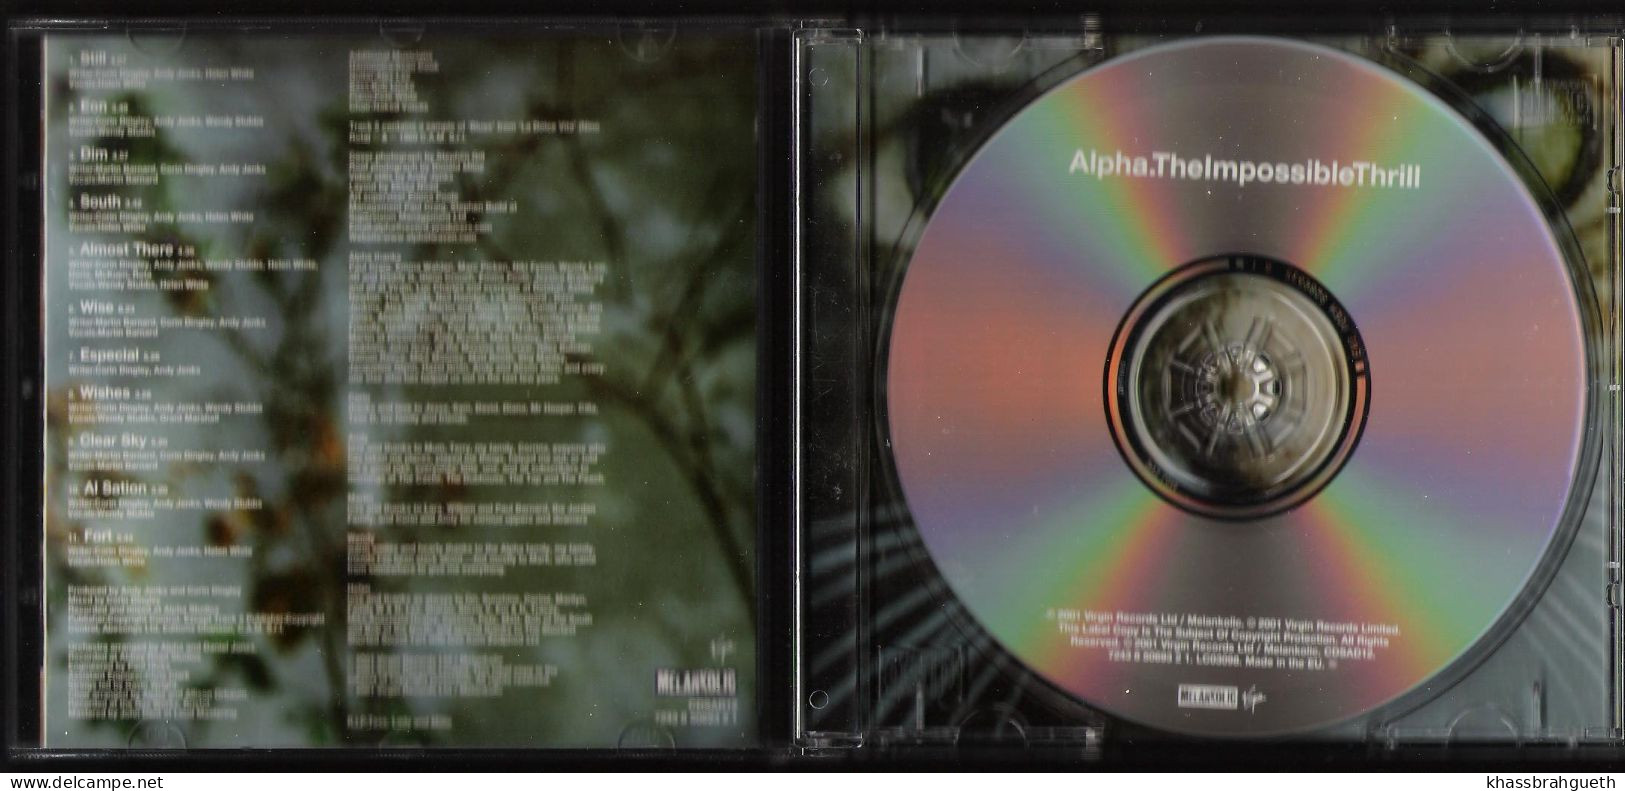 ALPHA - LOT 2 CD ALBUMS - COME FROM HEAVEN + THE IMPOSSIBLE THRILL - VIRGIN (1997/2001)